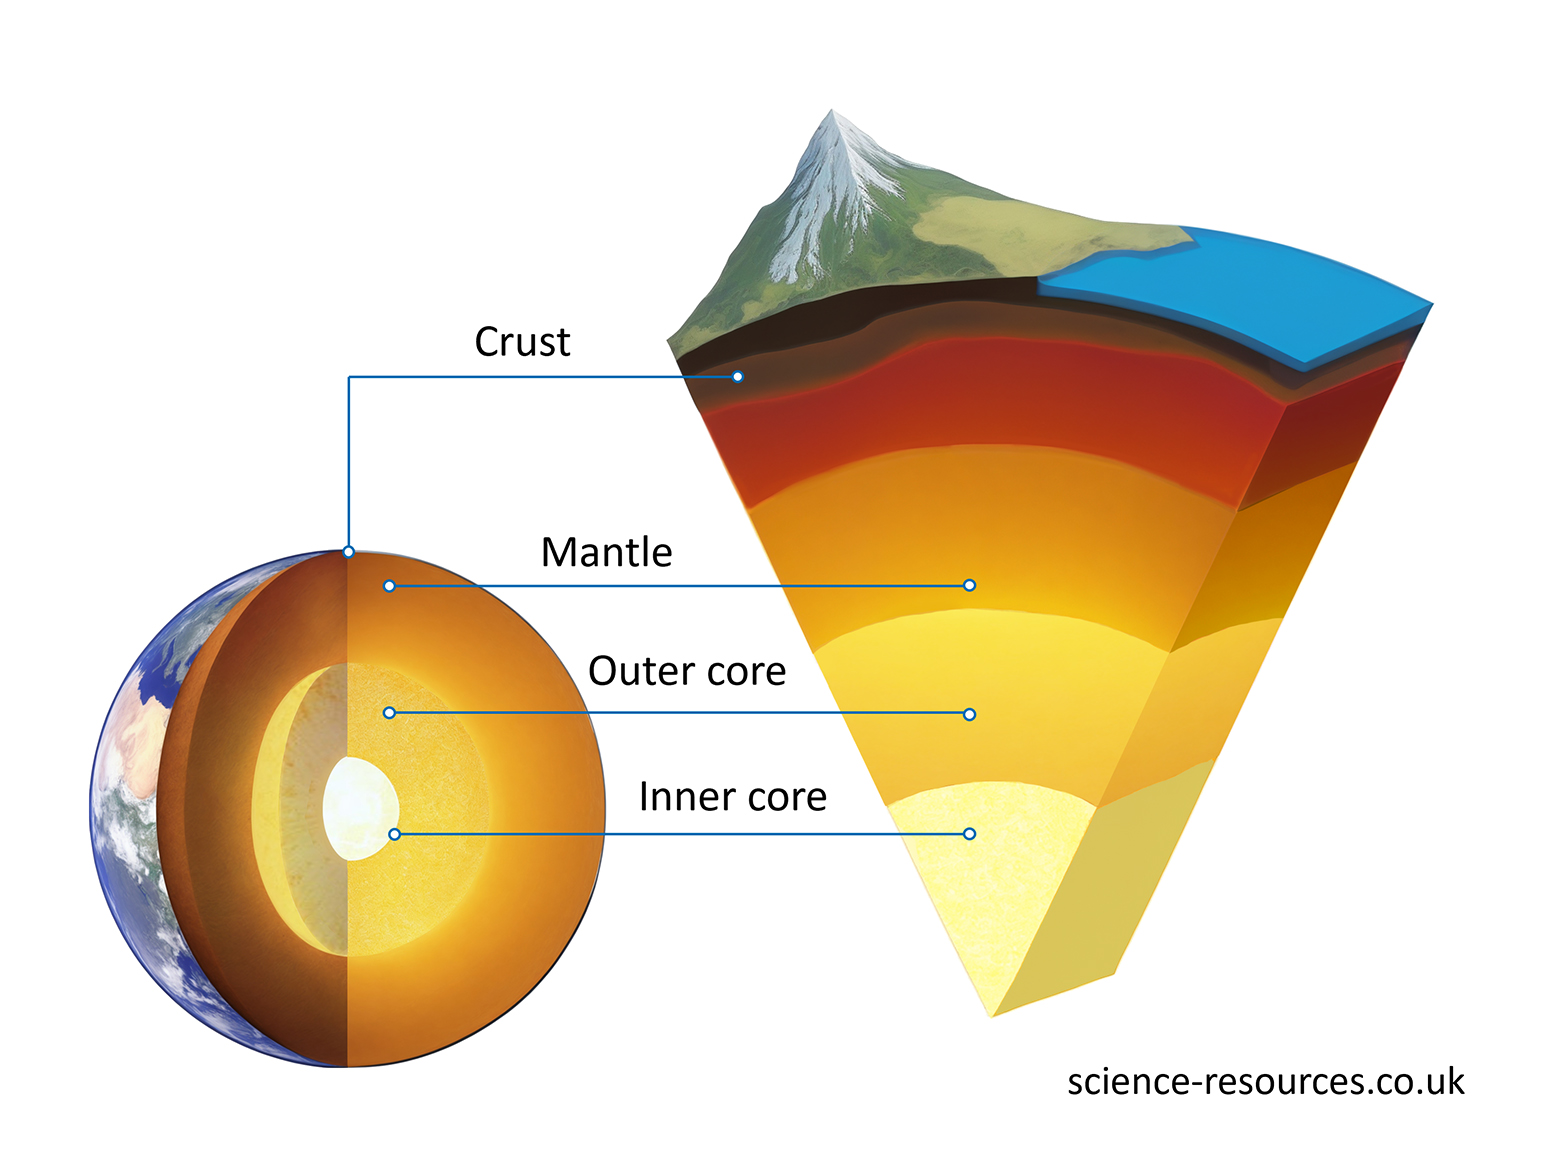 This image shows a diagram of the layers of the Earth, with labels indicating the crust, mantle, outer core, and inner core. The diagram also shows a realistic view of the Earth’s surface with continents and oceans.